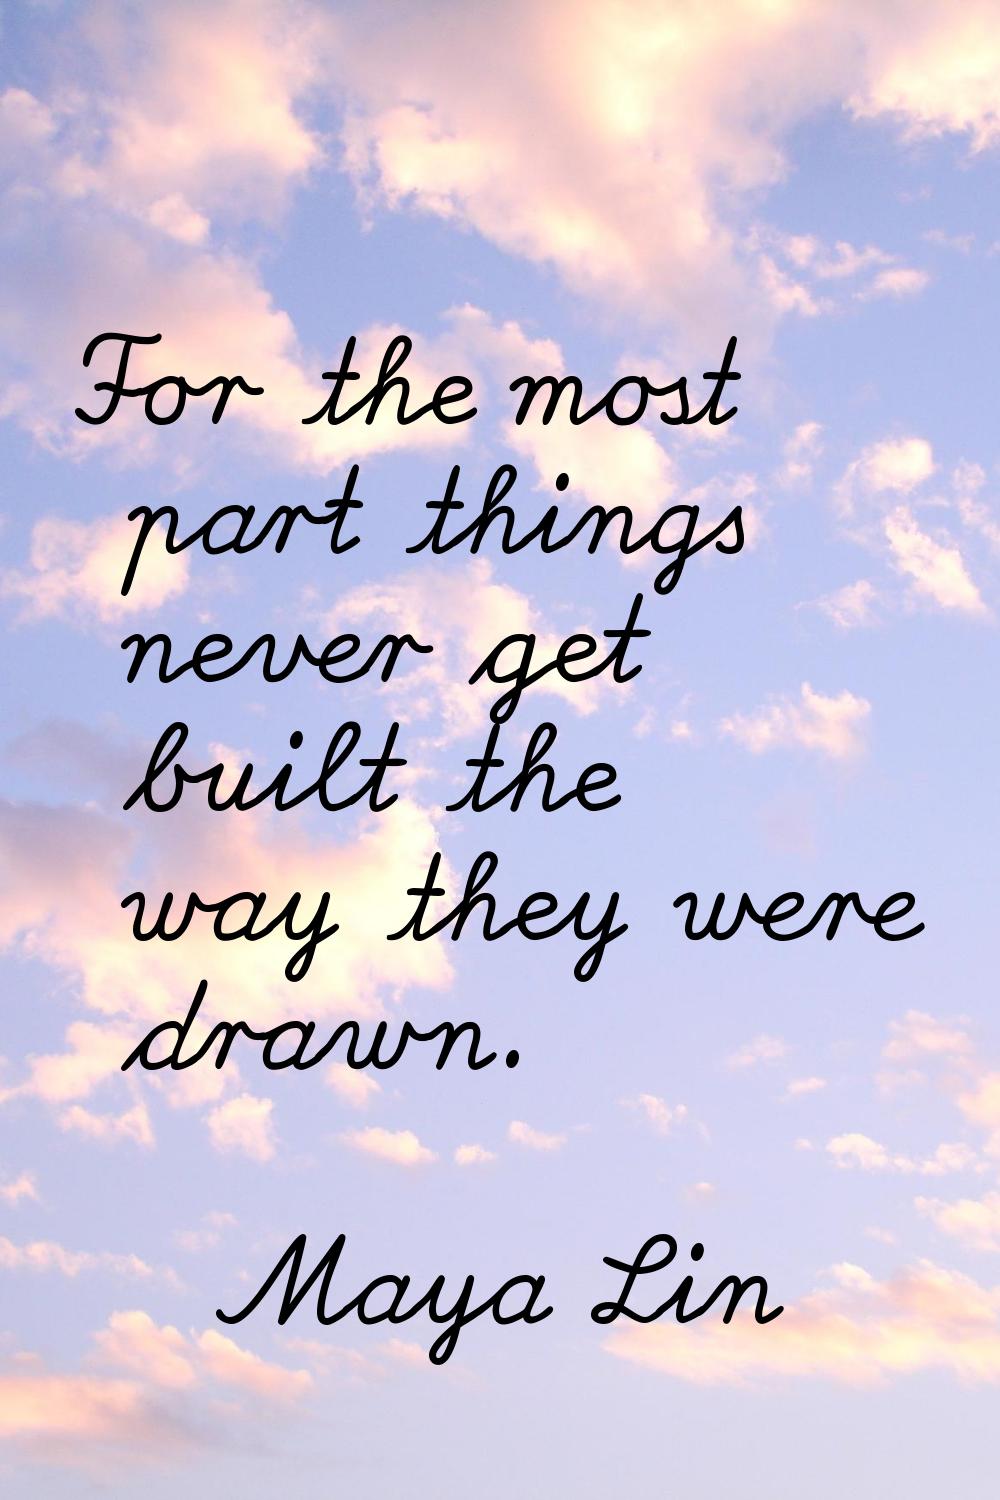 For the most part things never get built the way they were drawn.